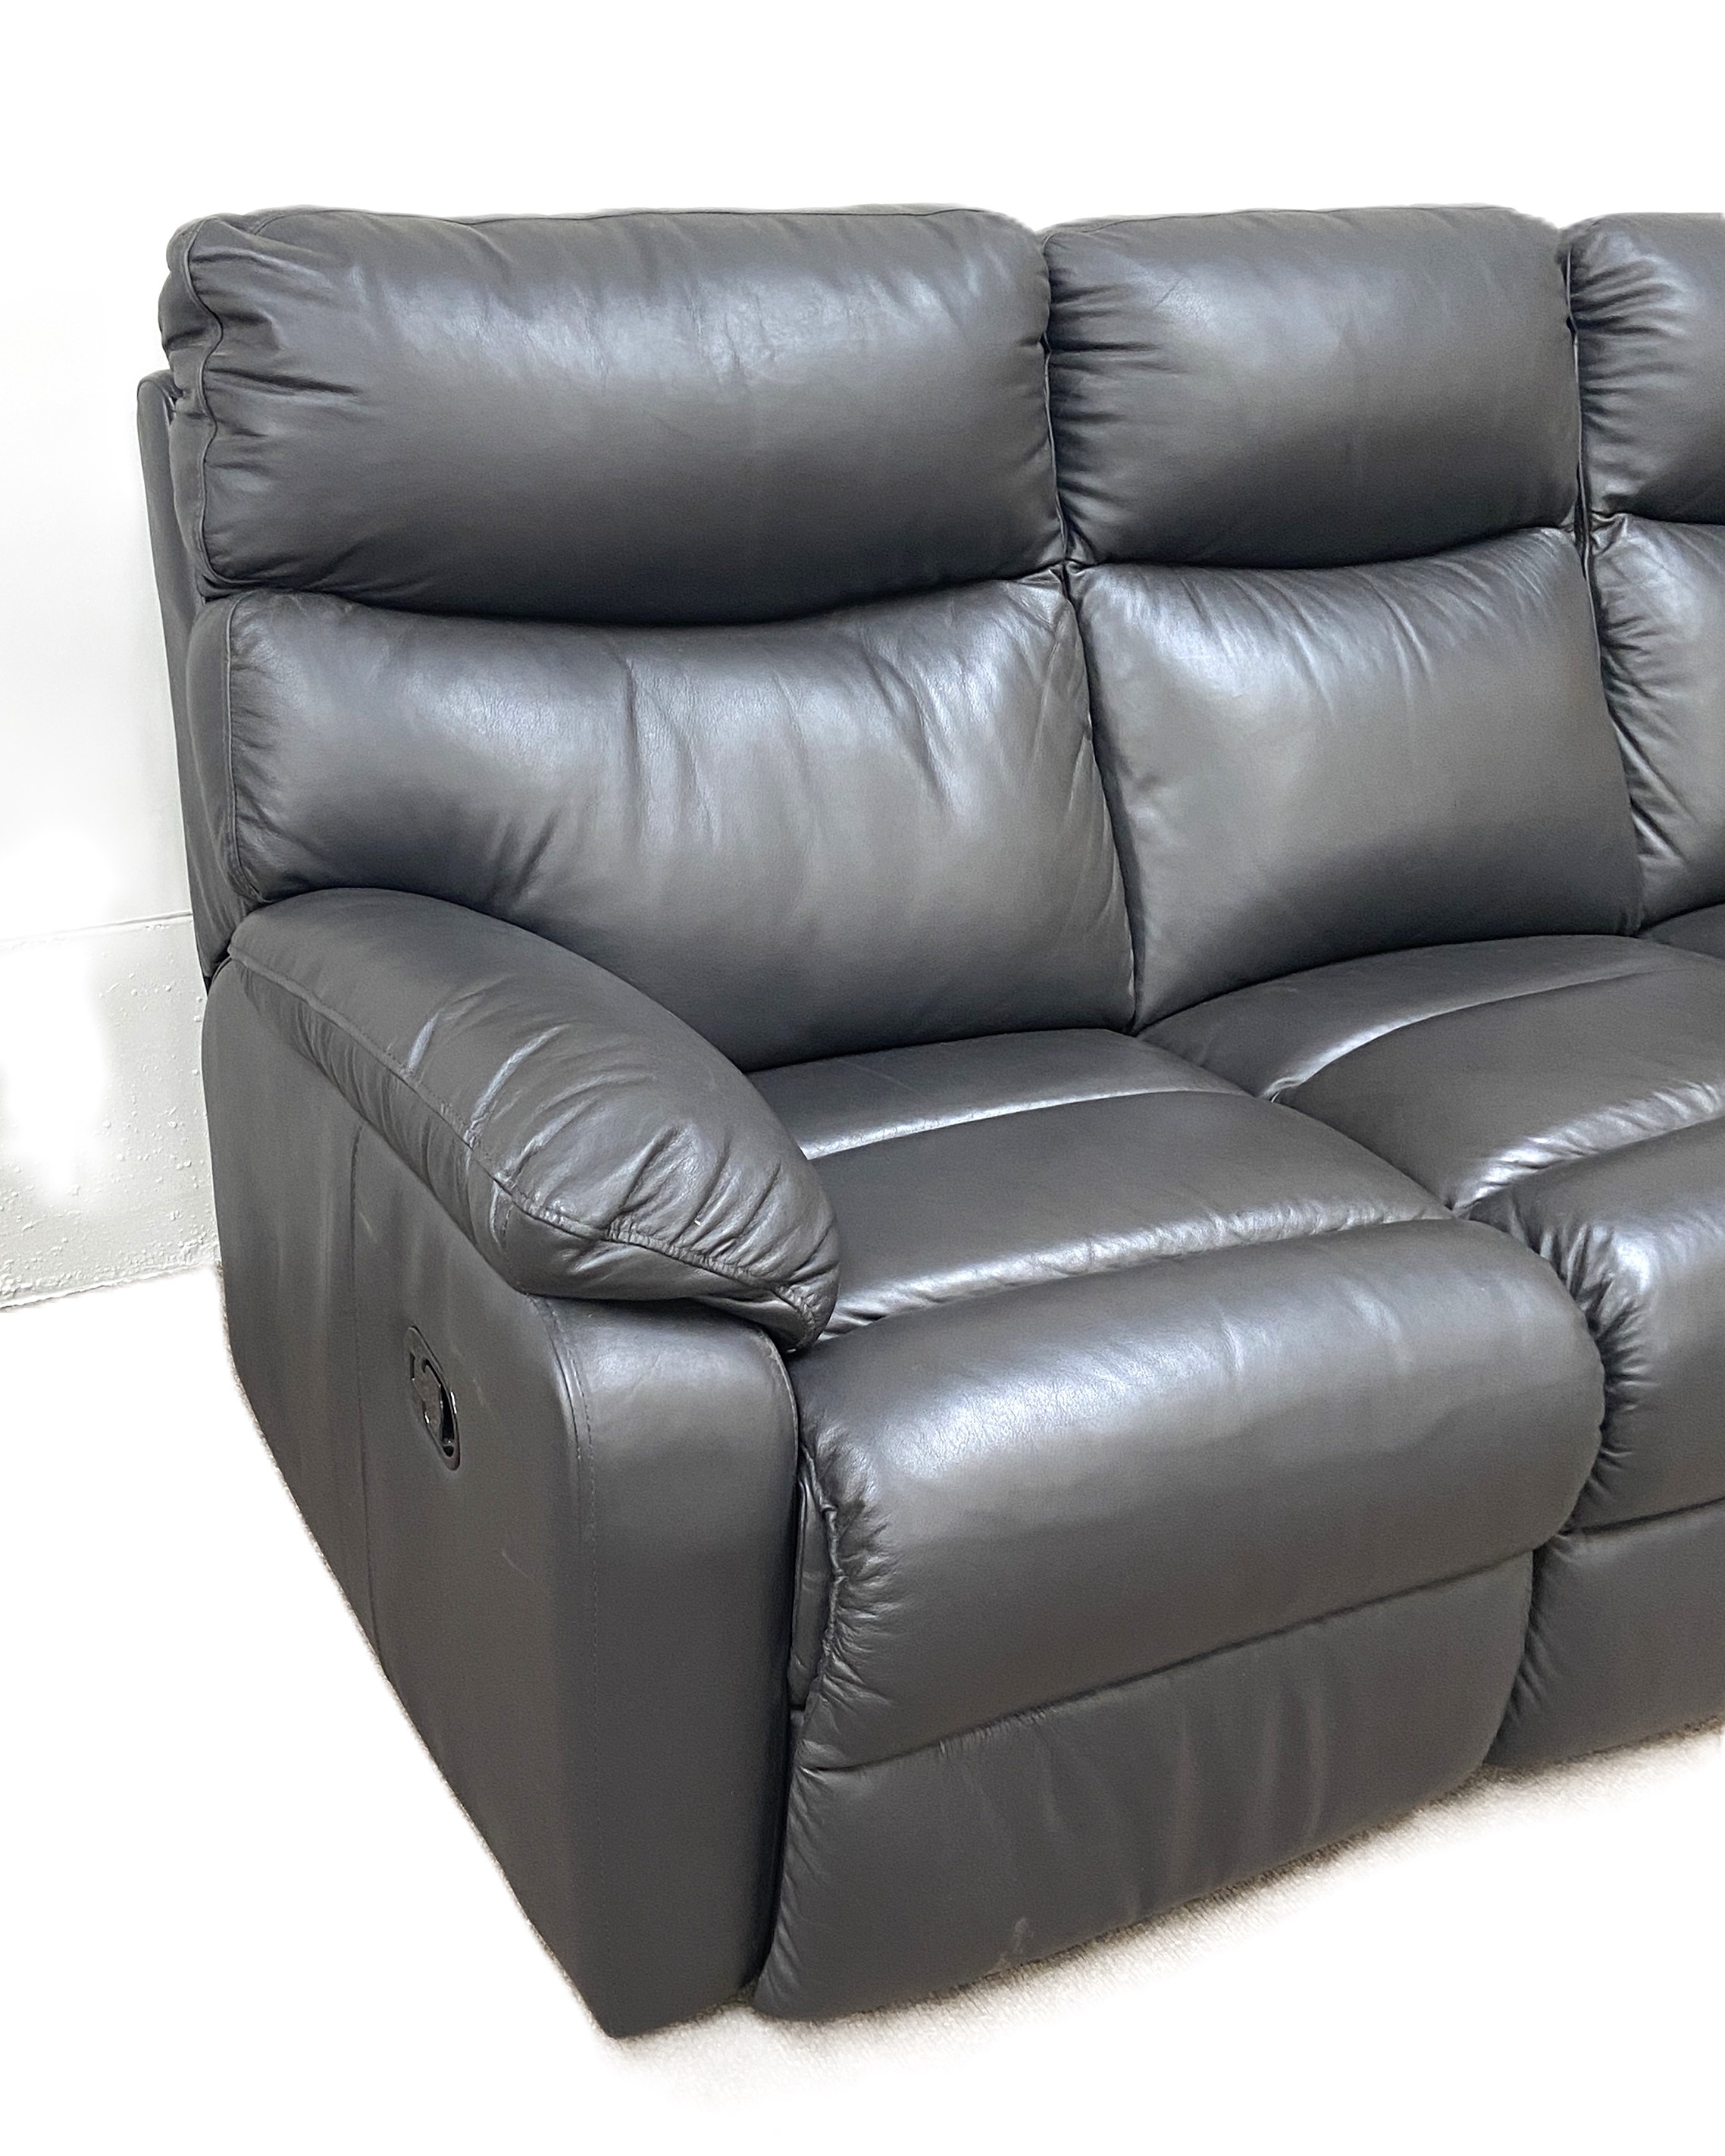 A modern three seat black leather reclining sofa, with two adjustable foot rests - Image 4 of 7